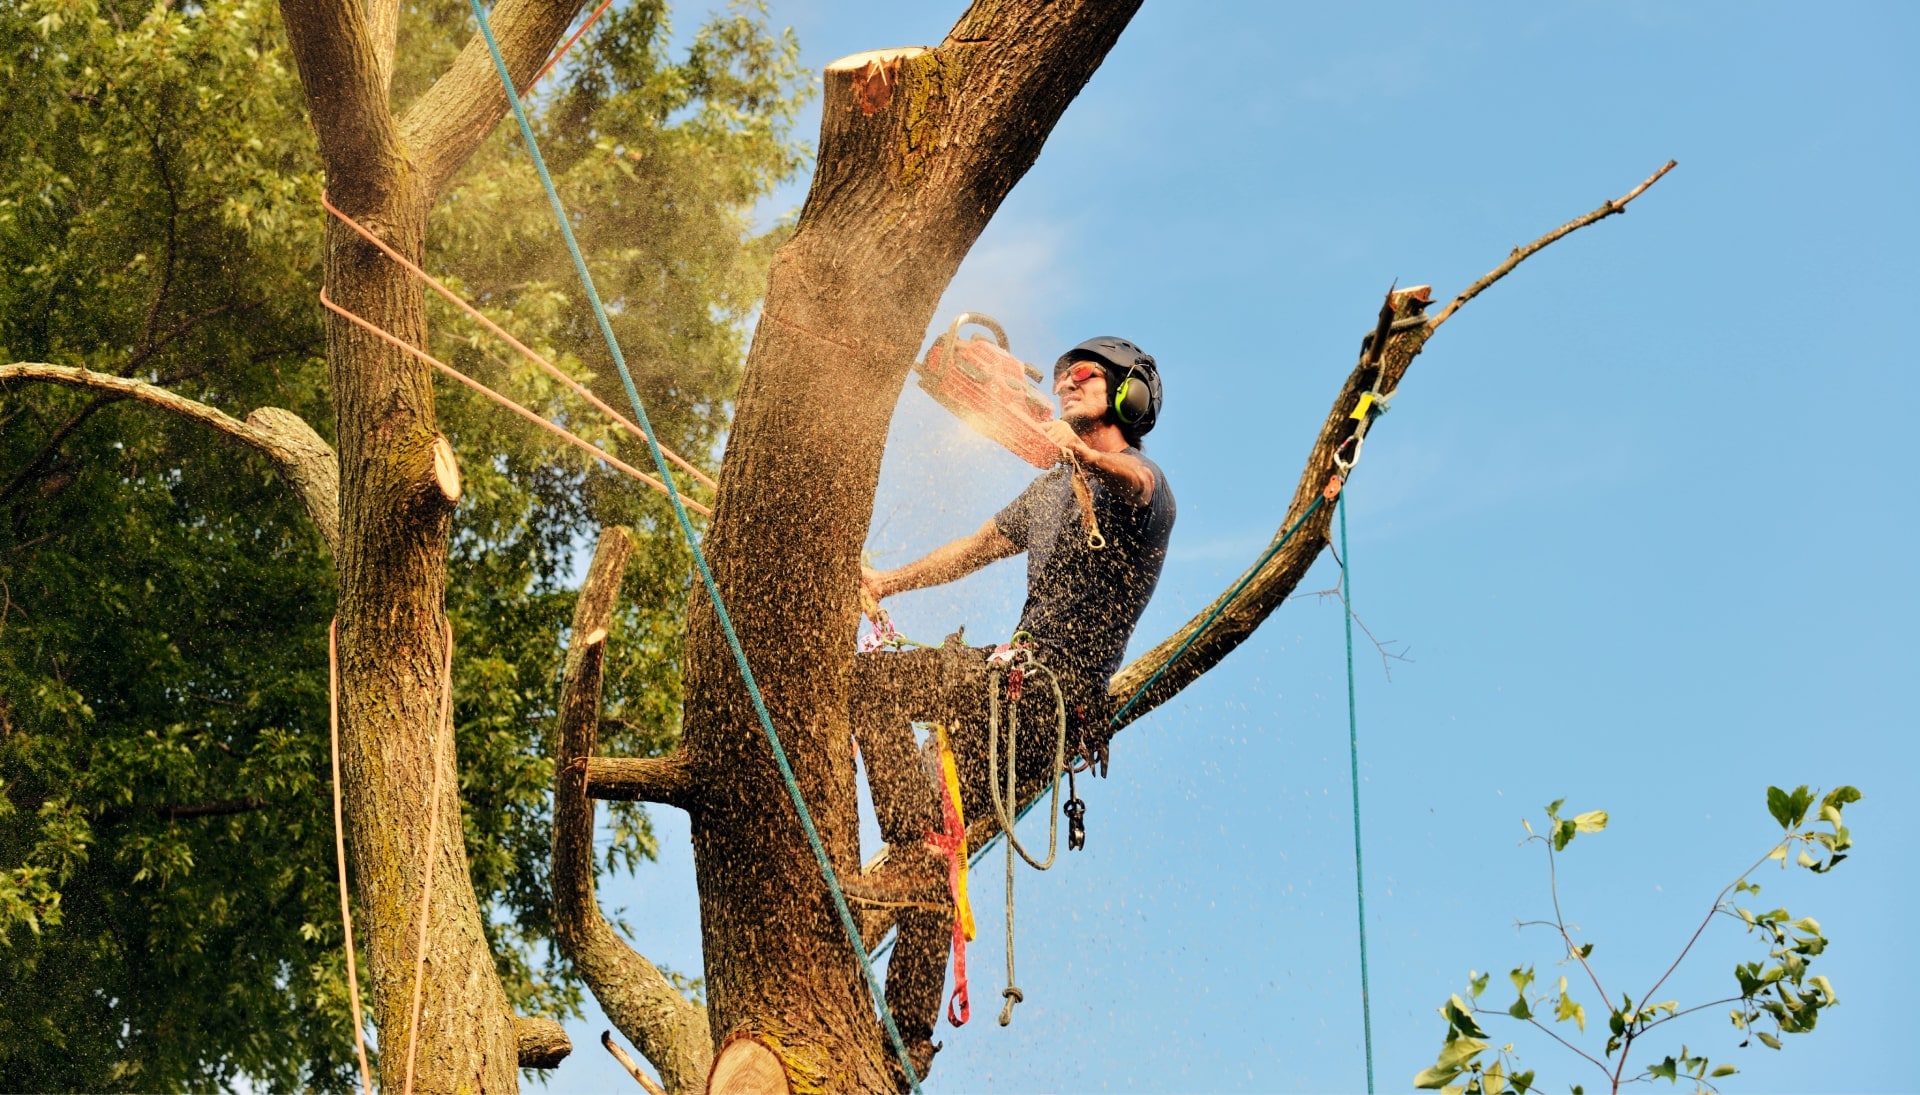 Greeley tree removal experts solve tree issues.